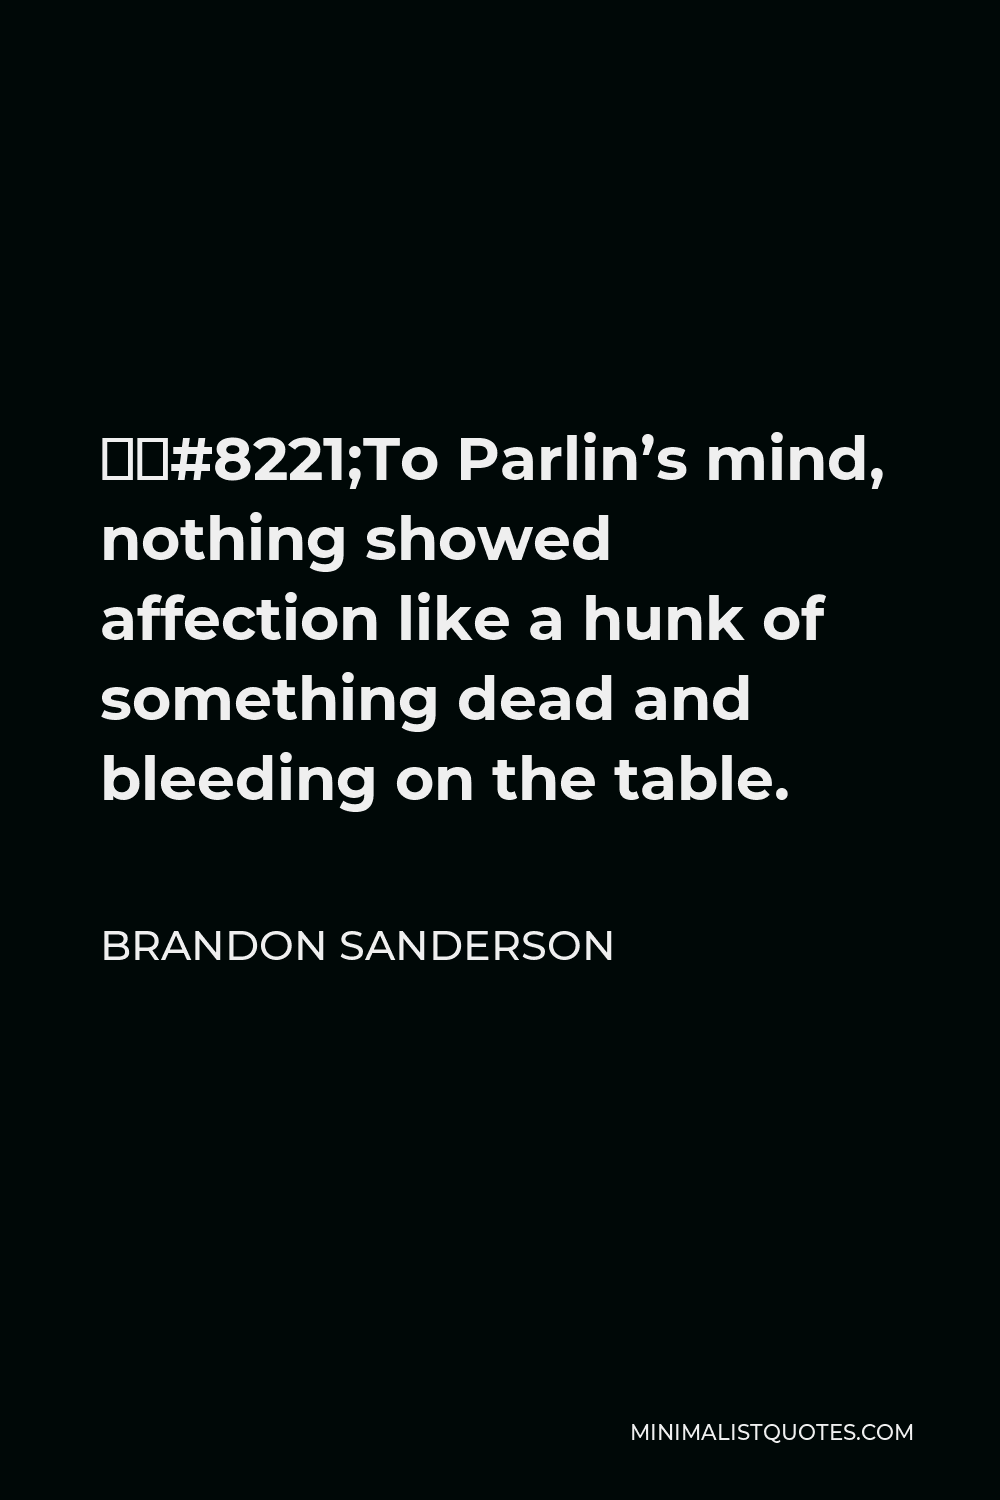 Brandon Sanderson Quote - ‎”To Parlin’s mind, nothing showed affection like a hunk of something dead and bleeding on the table.